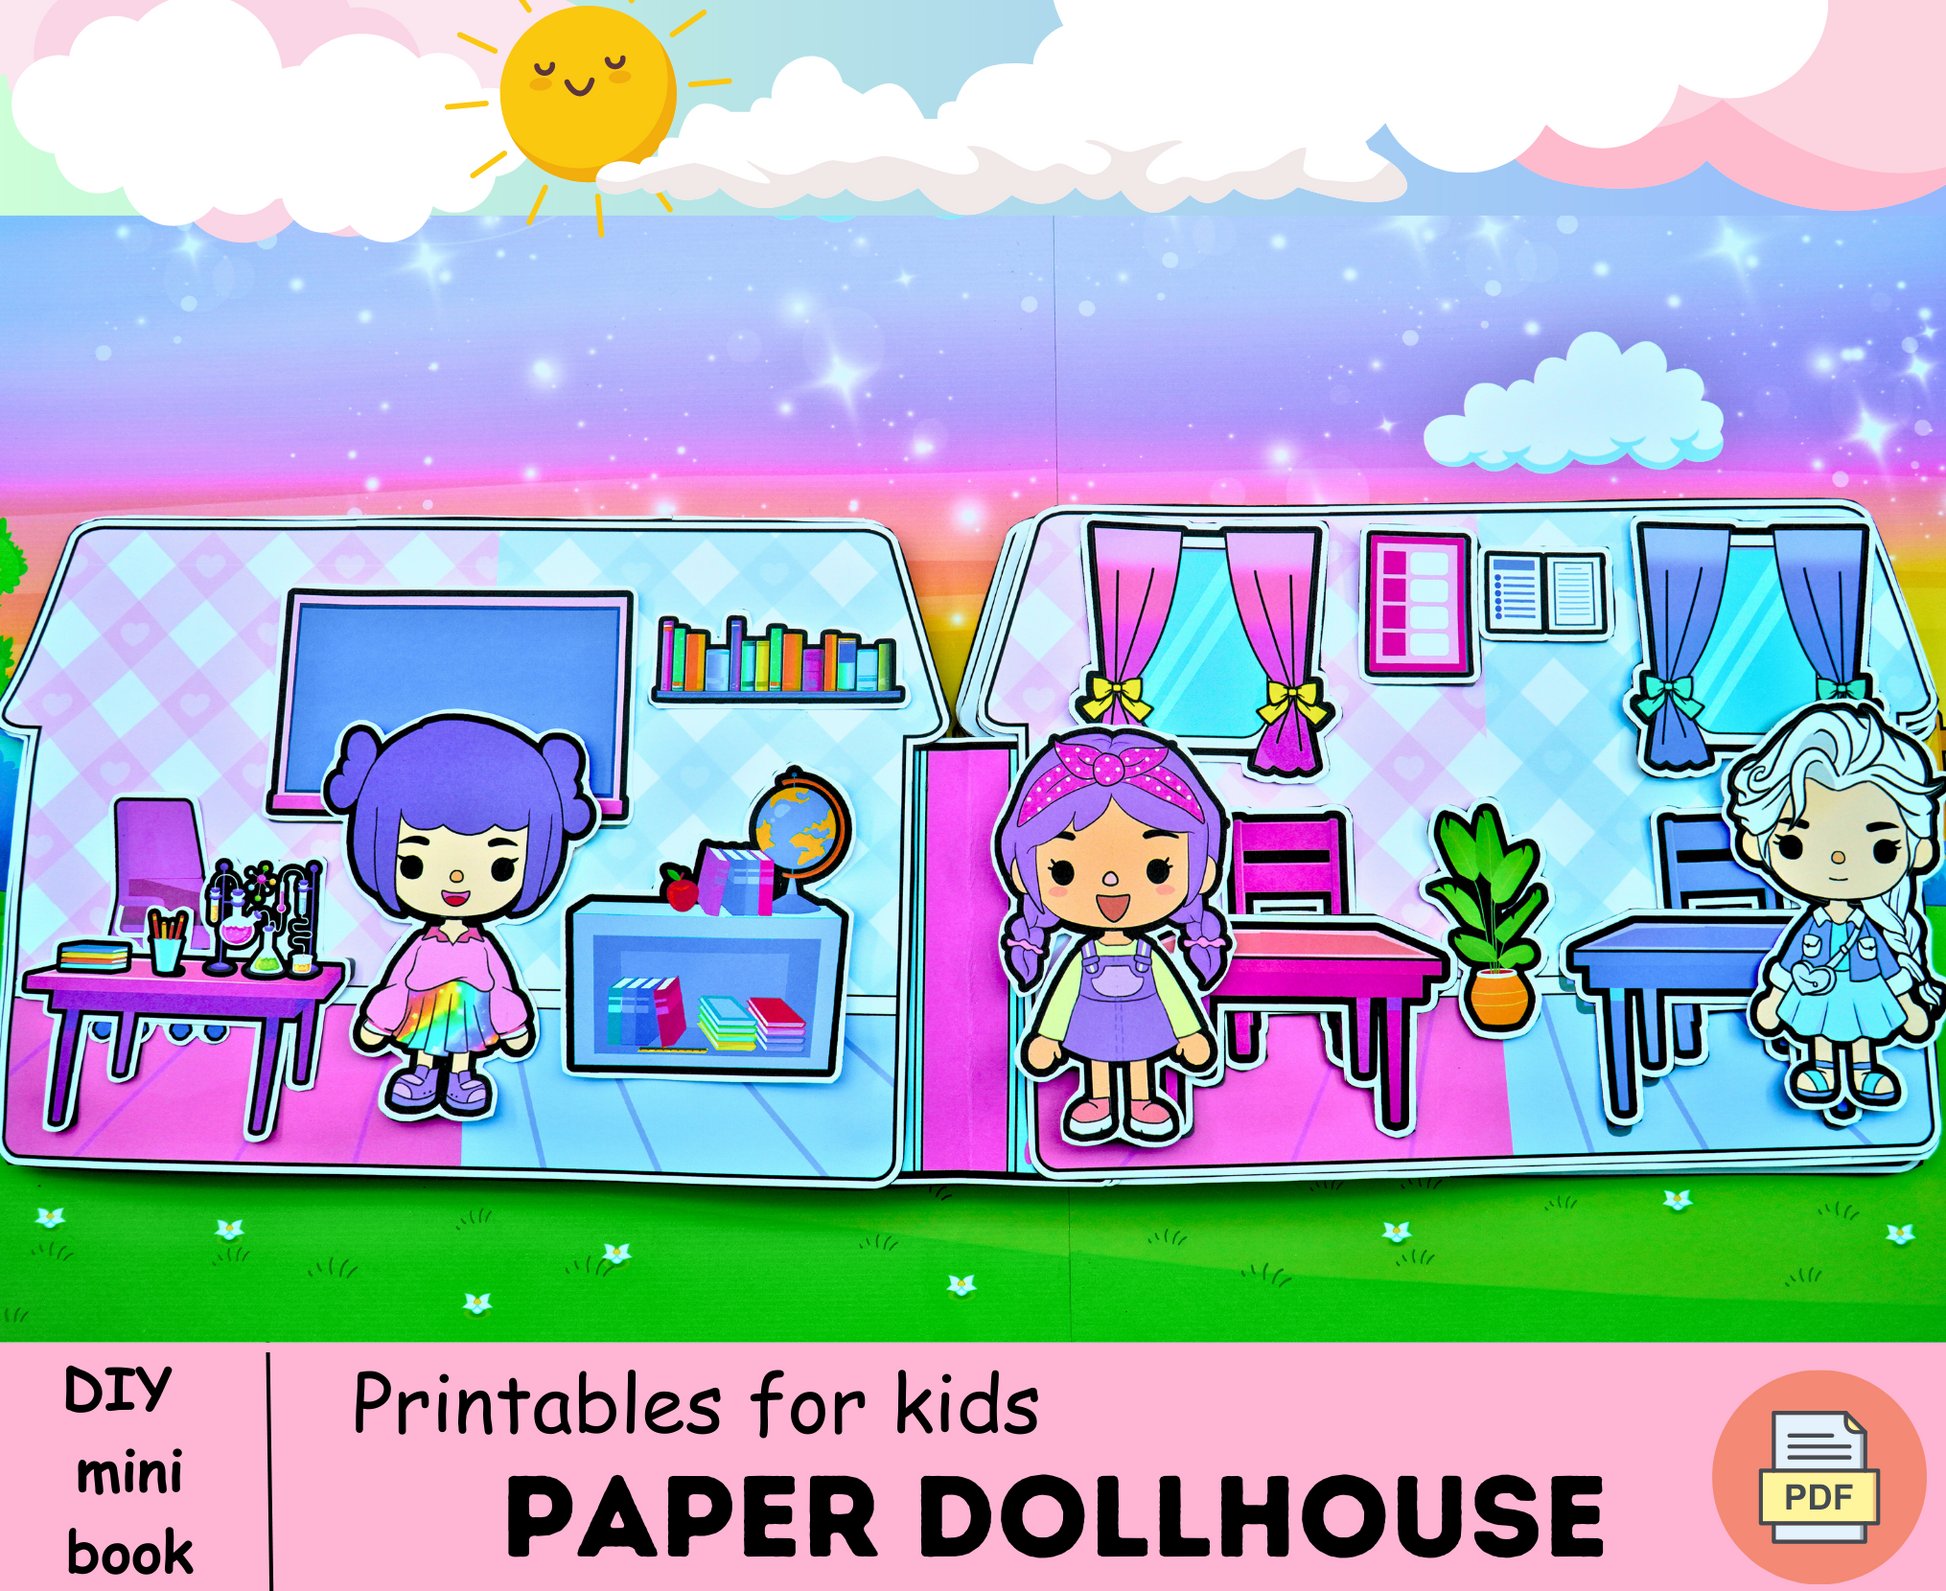 FREE kids room build in Toca! 🎨🧸 Tags: #toca #tocaboca